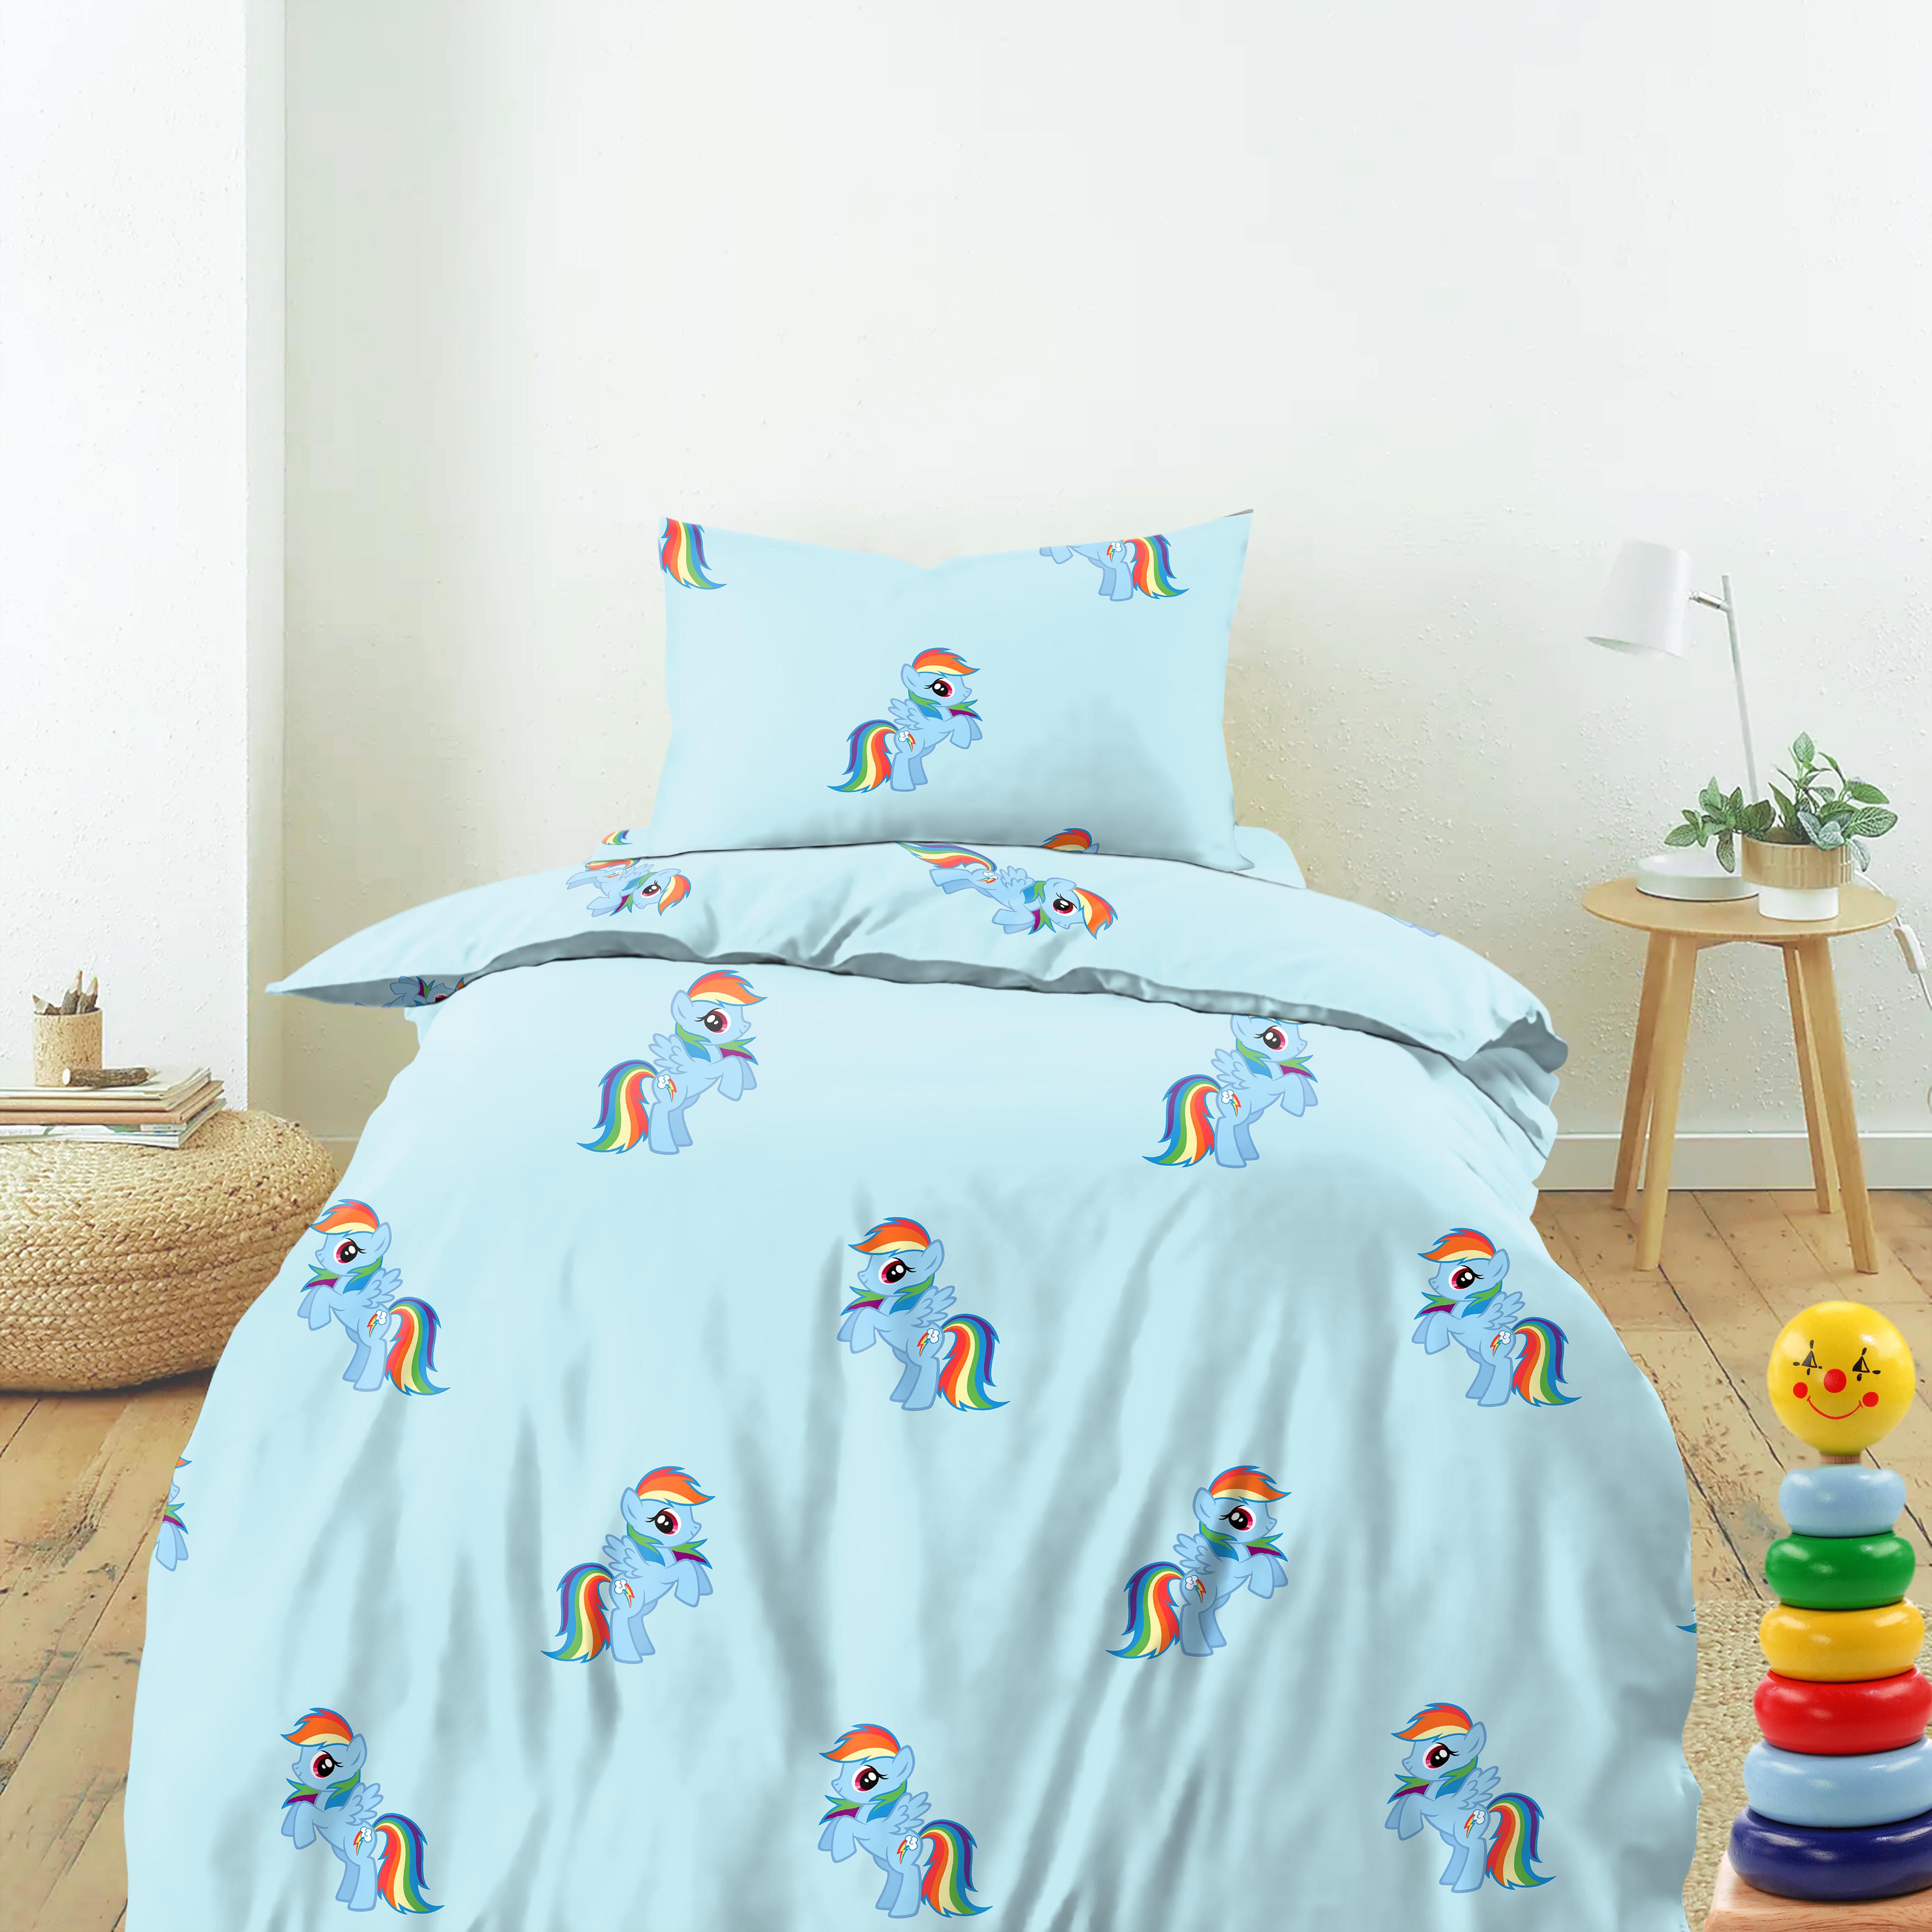 BEDCOVER RAINBOW PONY HAWKES BLUE FOR SINGLE BED WITH PILLOW COVERS KING SIZE (60" X 90")